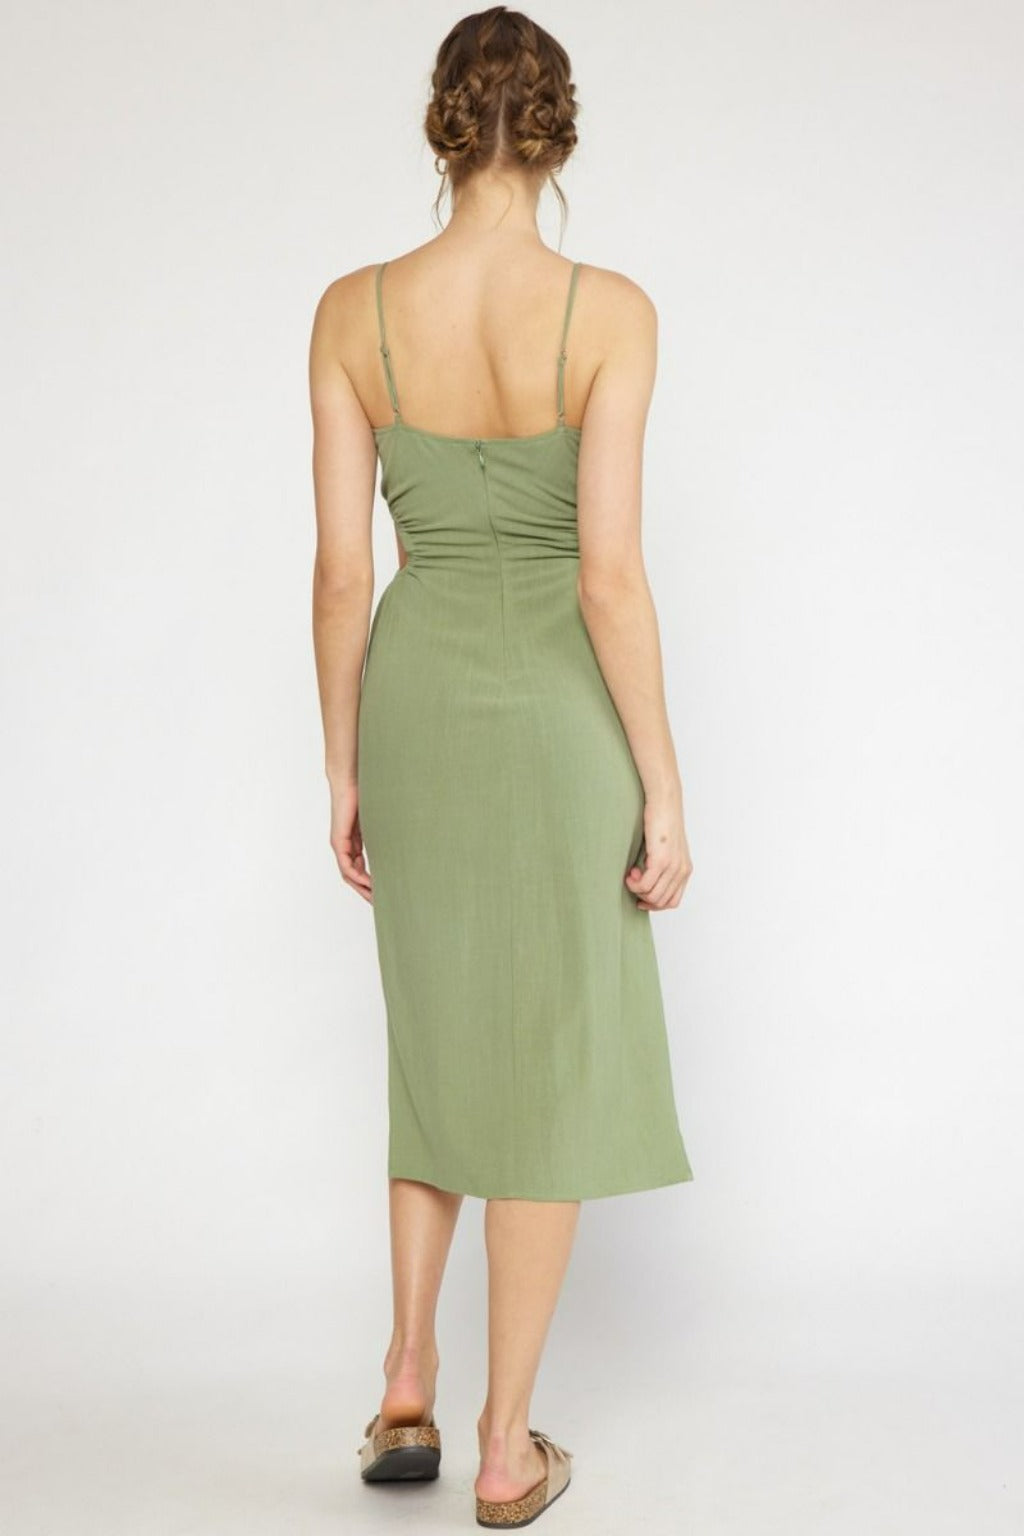 Stone Strap Linen with Side Cut-Outs Midi Dress in Olive